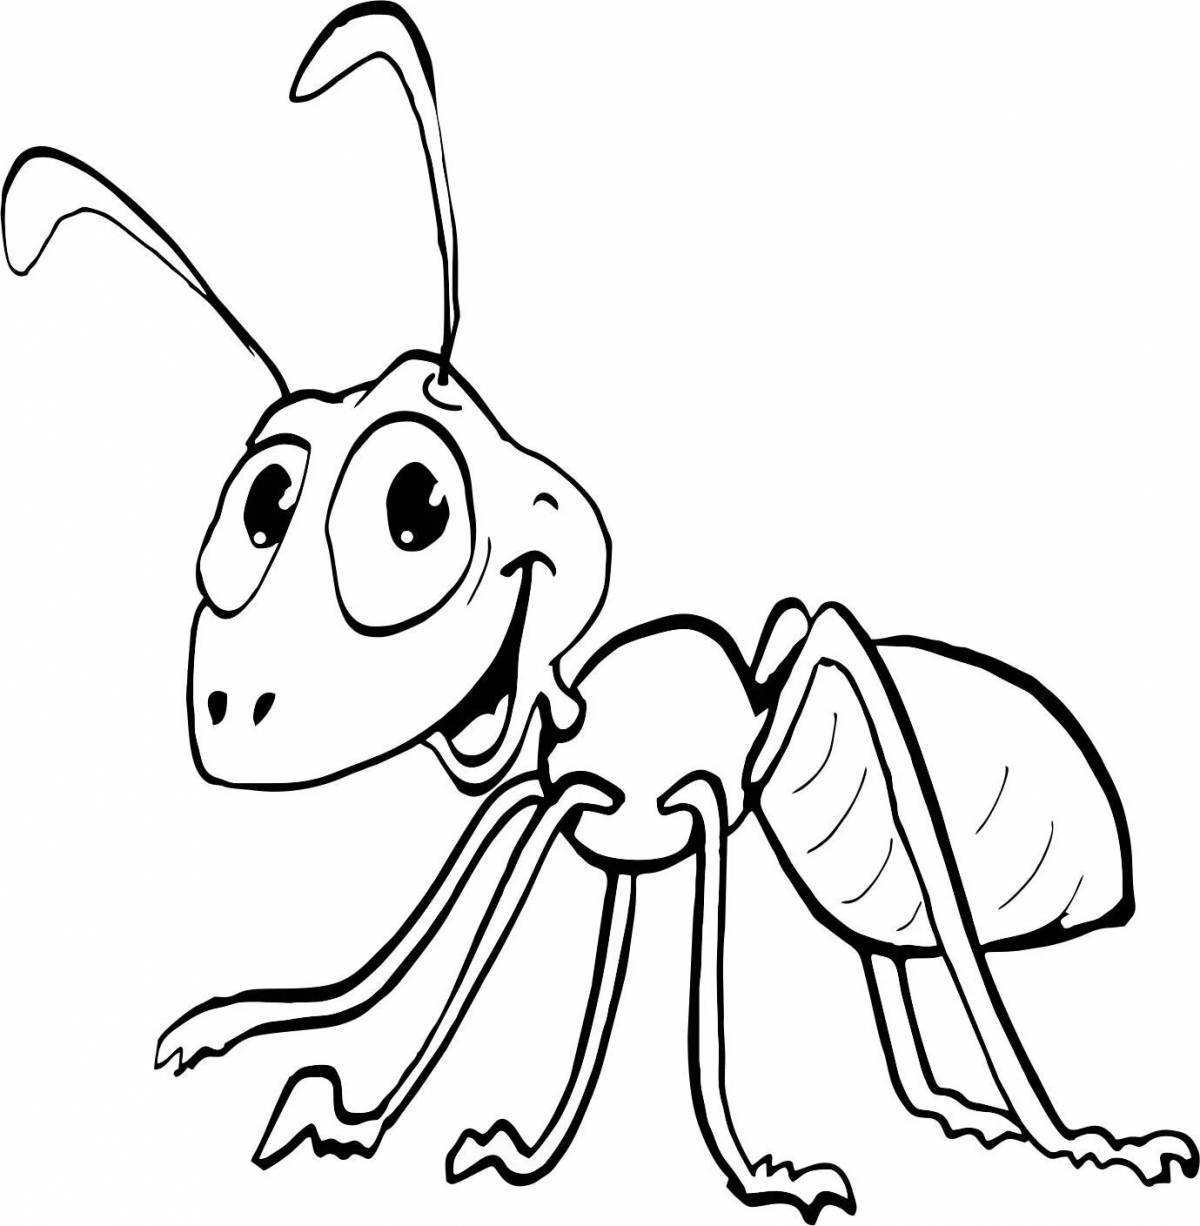 Exciting ant coloring book for kids